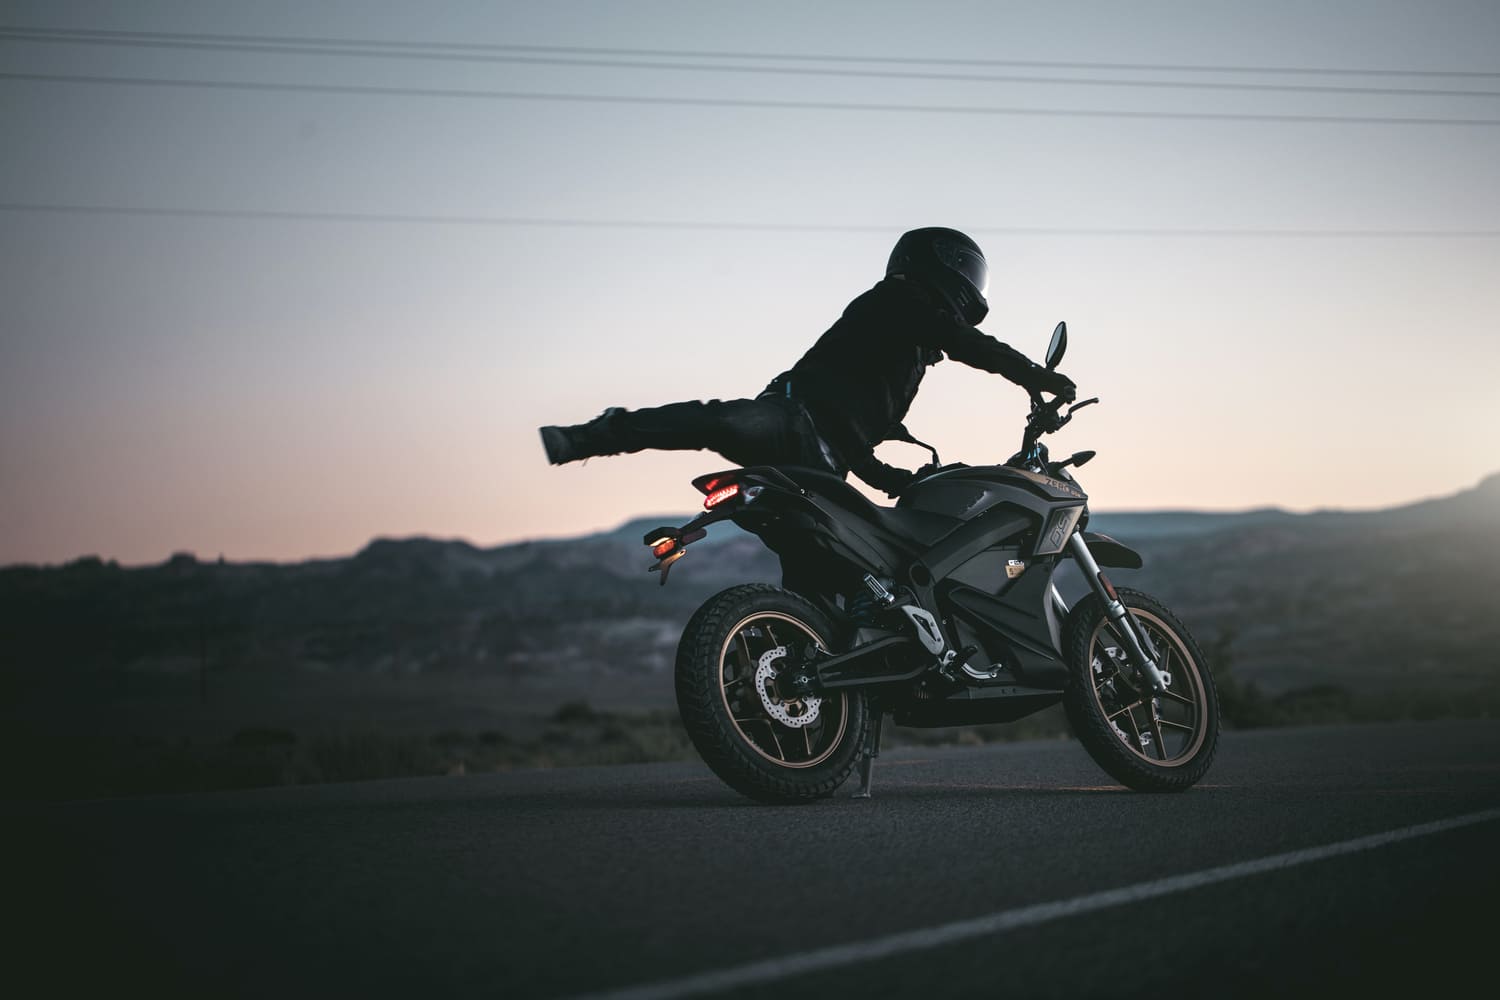 man turning a motorcycle with one leg in the air